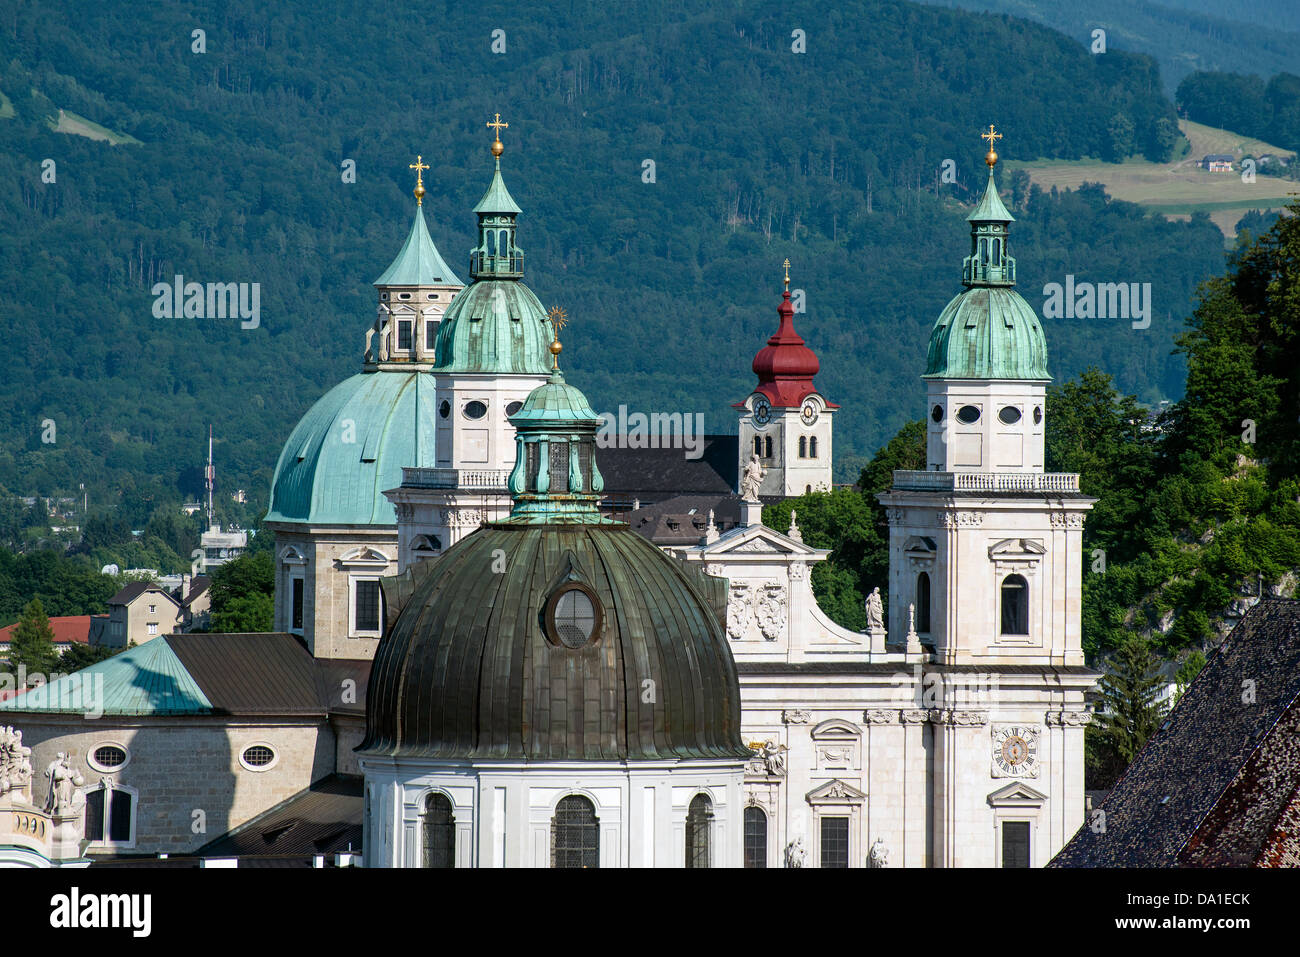 Panoramic view over domes and belfries in the old town, Salzburg, Austria Stock Photo